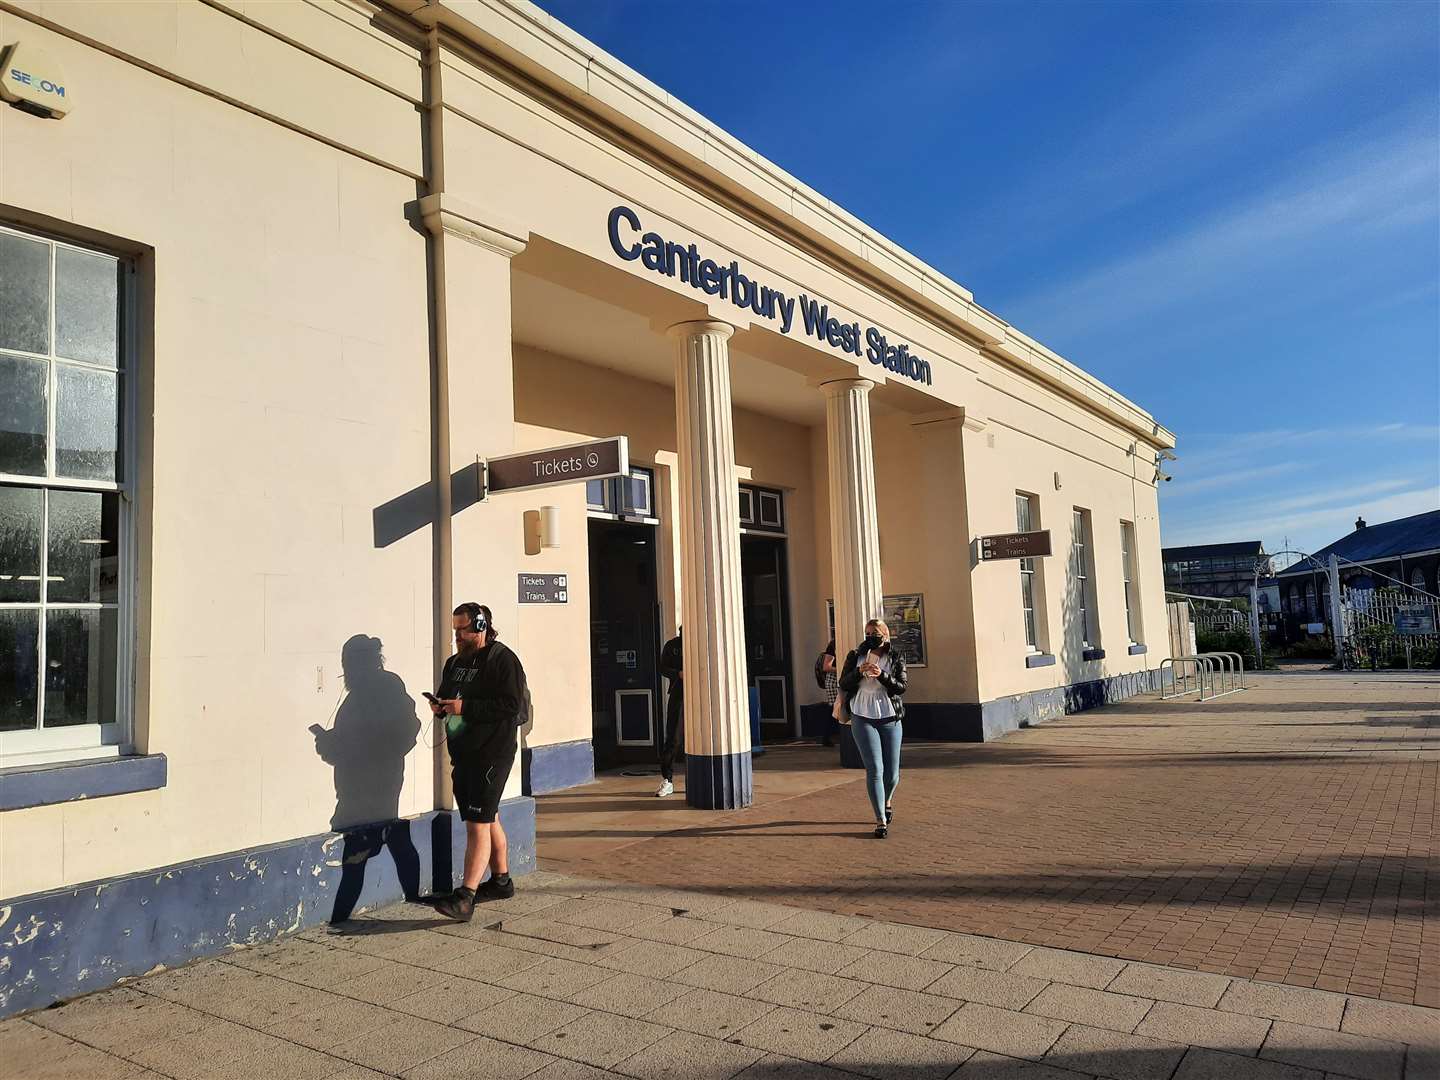 Emergency services are attending an incident which has shut Canterbury West railway station